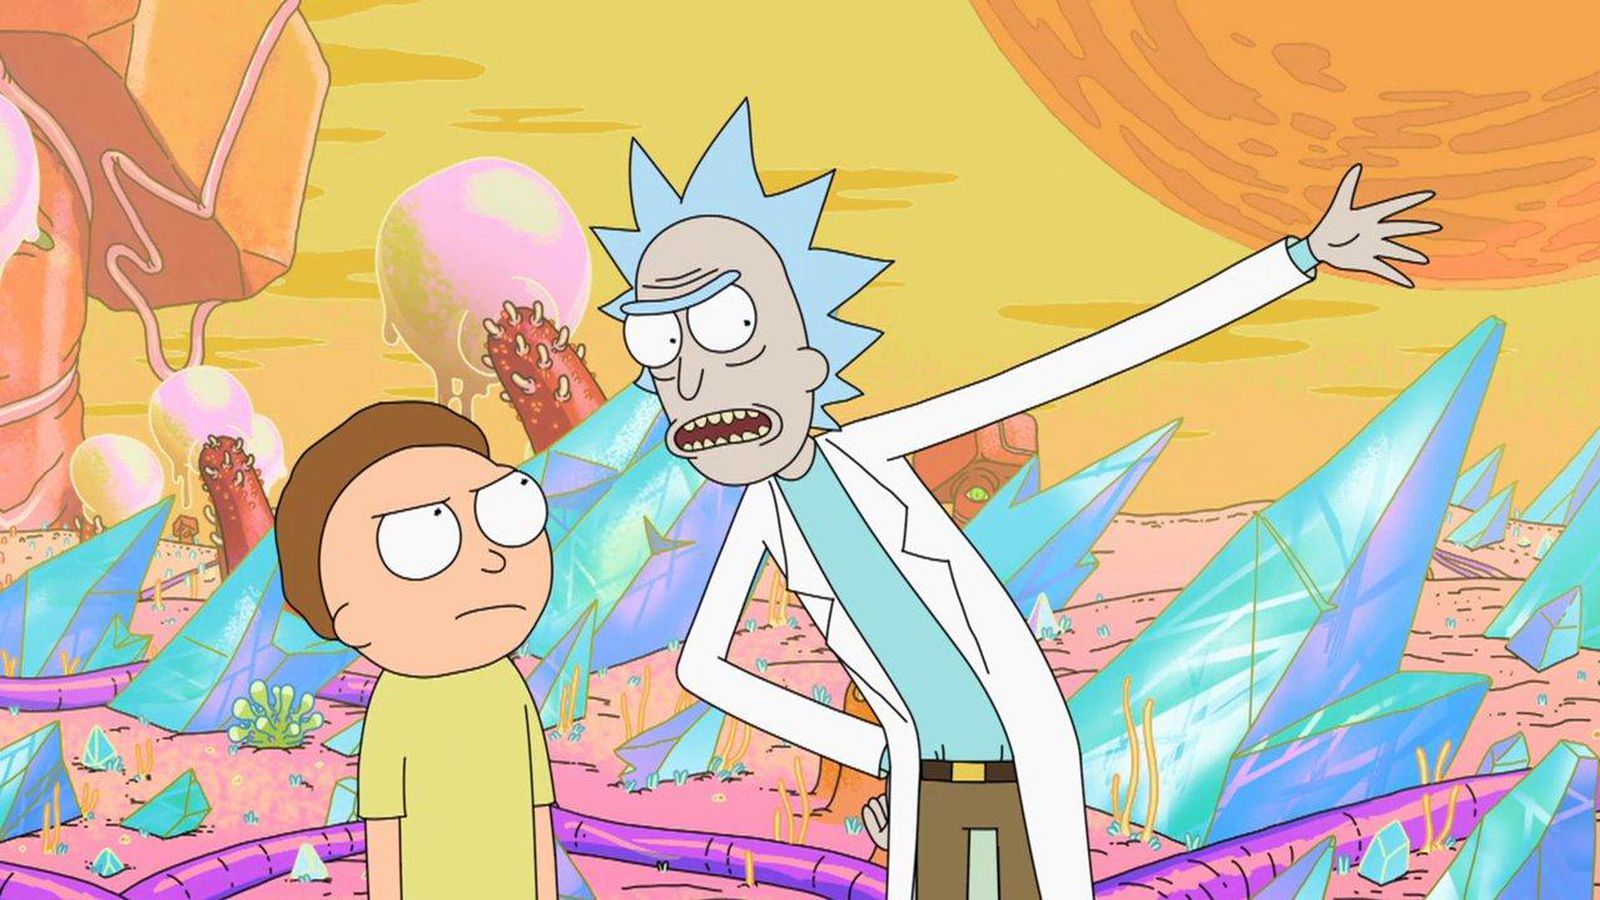 Rick and Morty's third season will premiere in one month, have 10